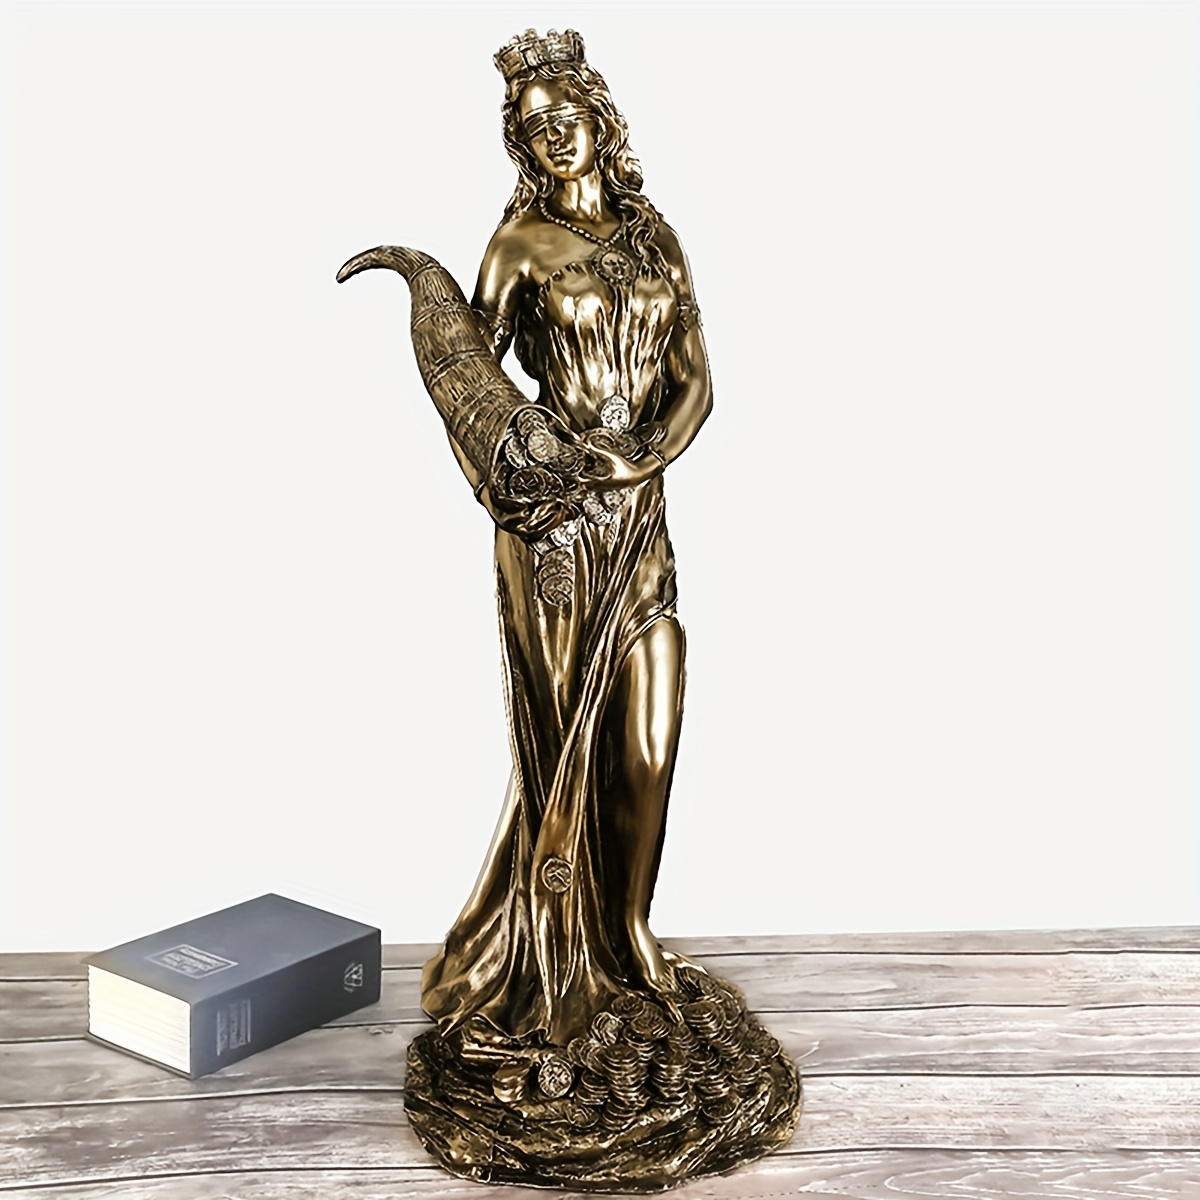 

Greek Goddess Of Wealth Statue - 8.5" Resin Sculpture For Prosperity & Good Fortune, Perfect For Home Office Decor